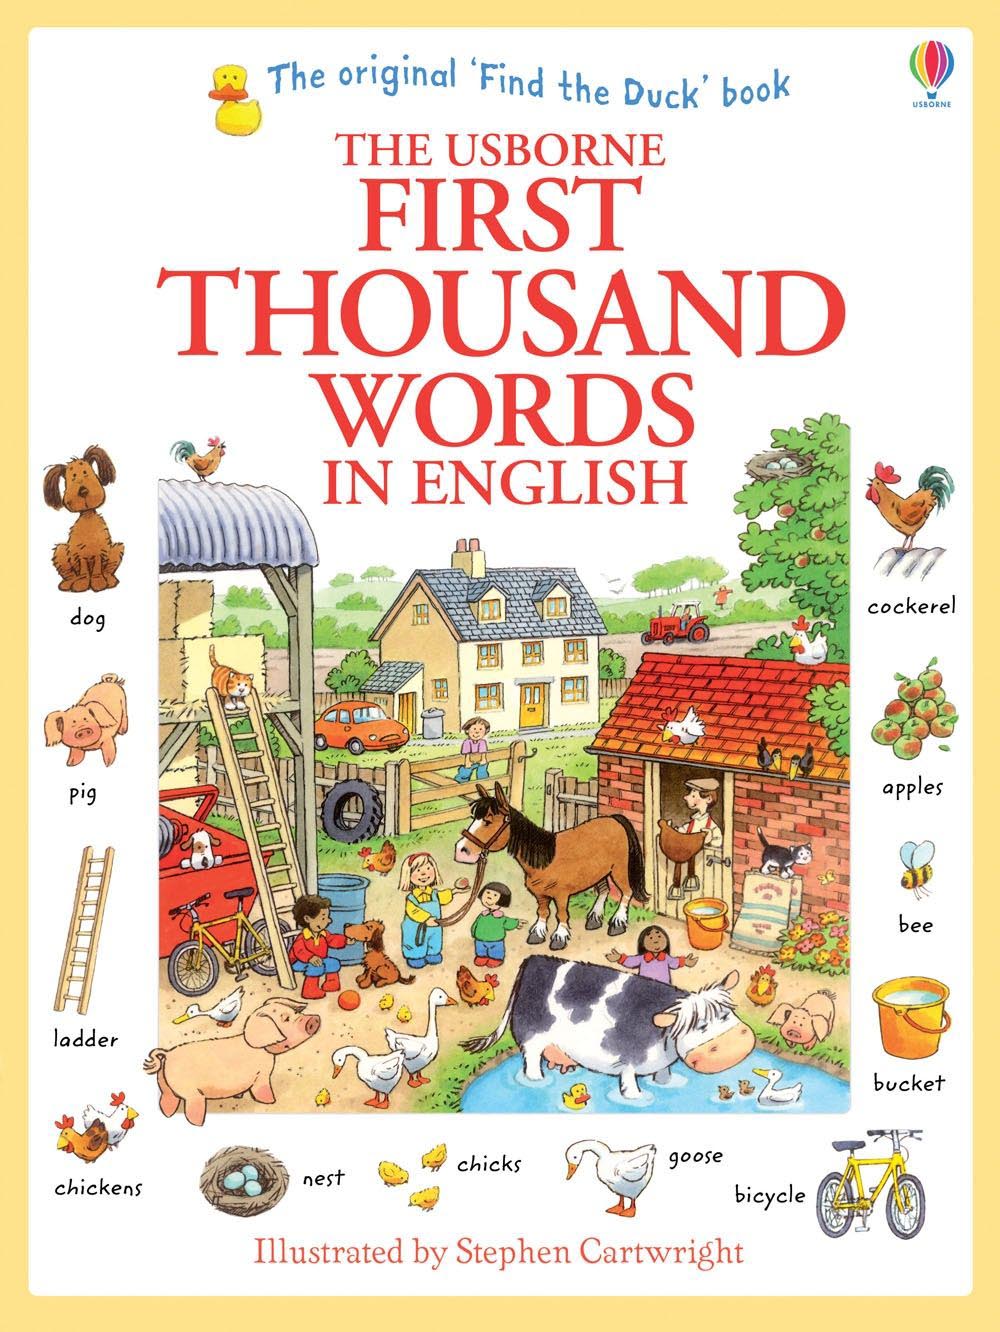 The Usborne First Thousand Words in English